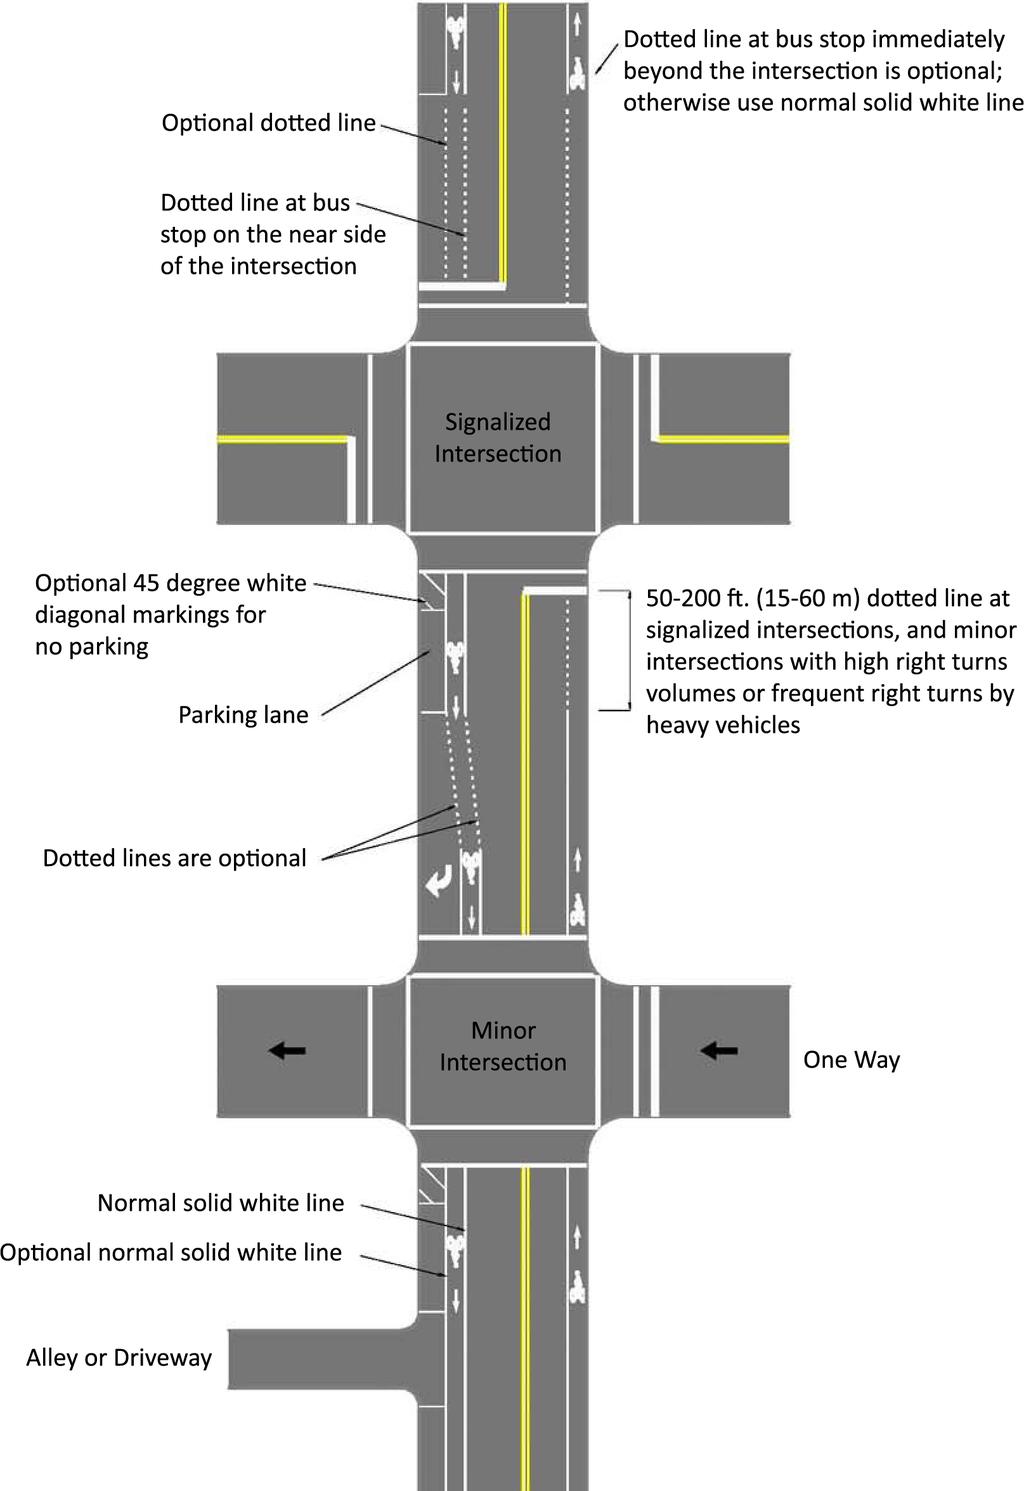 FIGURE 6-4 Bike Lane Intersection Plan of an intersection, including bus stops, the dotted line should be continued through the parking restriction.